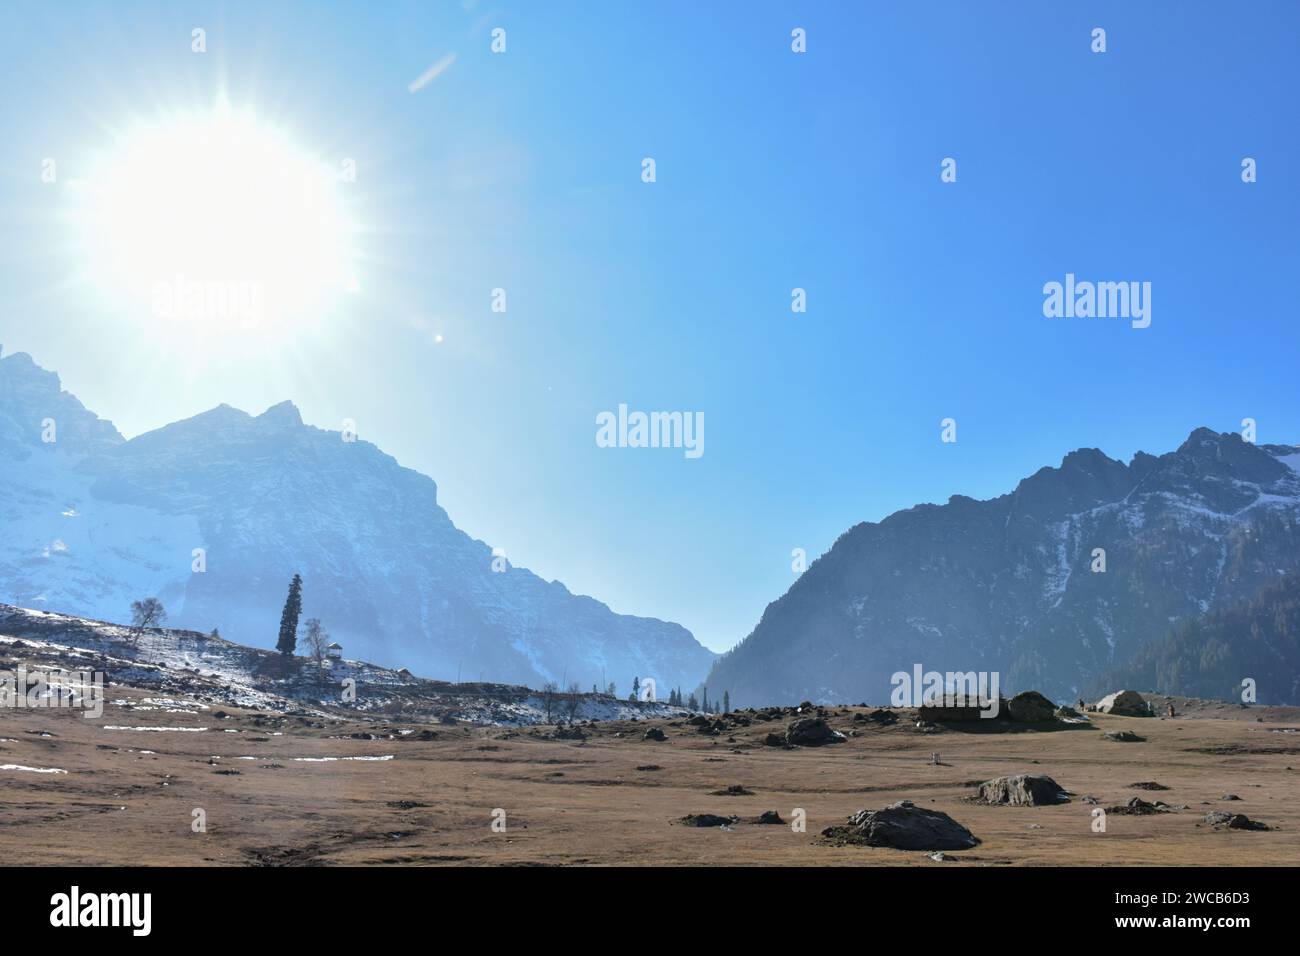 A view of snowless Sonamarg hill station during a sunny winter day in Sonamarg hill station, about 100kms from Srinagar. A prolonged dry spell is sweeping across Kashmir valley during the harshest phase of winter. Tourist resorts such as Gulmarg, Pahalgam, and Sonamarg would typically have accumulated ample snow by now. But this year, the Kashmir valley is dry with no snow anywhere to be seen. While the tourism sector has got hit badly, as tourists, who had planned to visit the Valley during January to enjoy snow, are cancelling their trips. (Photo by Saqib Majeed/SOPA Images/Sipa USA) Stock Photo